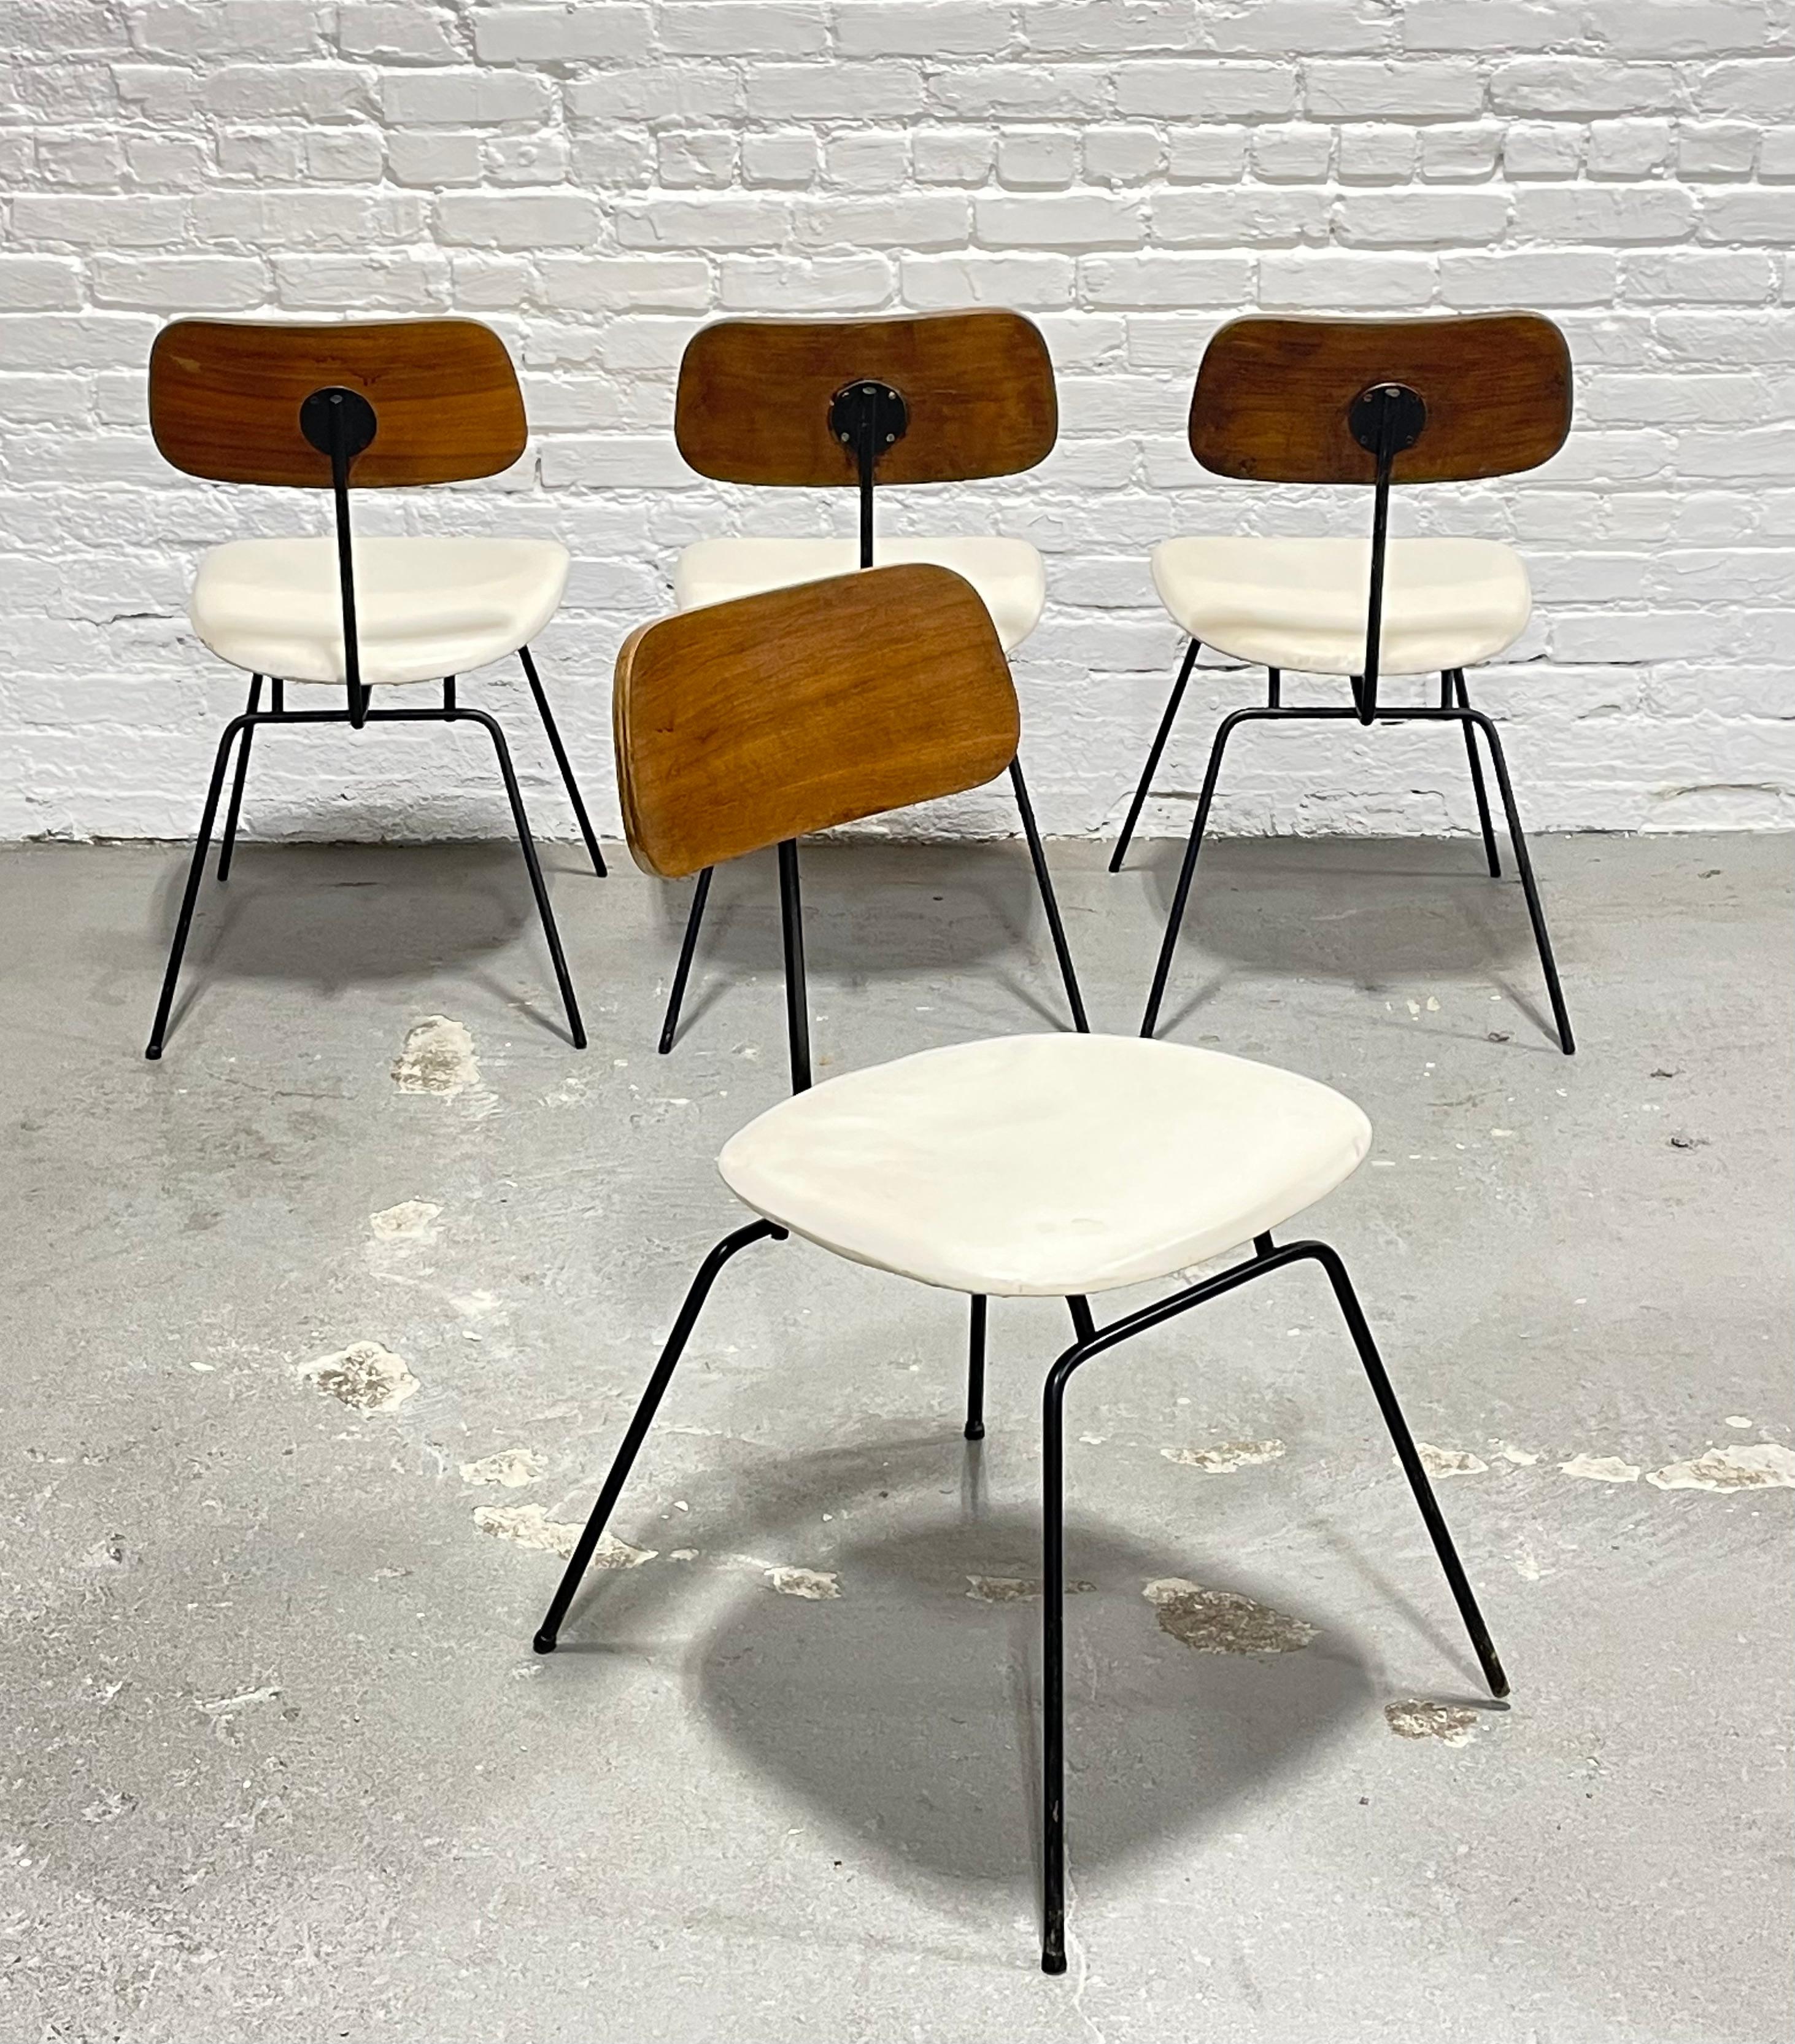 Mid Century Modern Dining Chairs in the style of Clifford Pascoe, c. 1960's. This unique set is made with walnut wood and solid + sturdy black iron bases. This set is the perfect combination of mid century with a hint of industrial design. Good